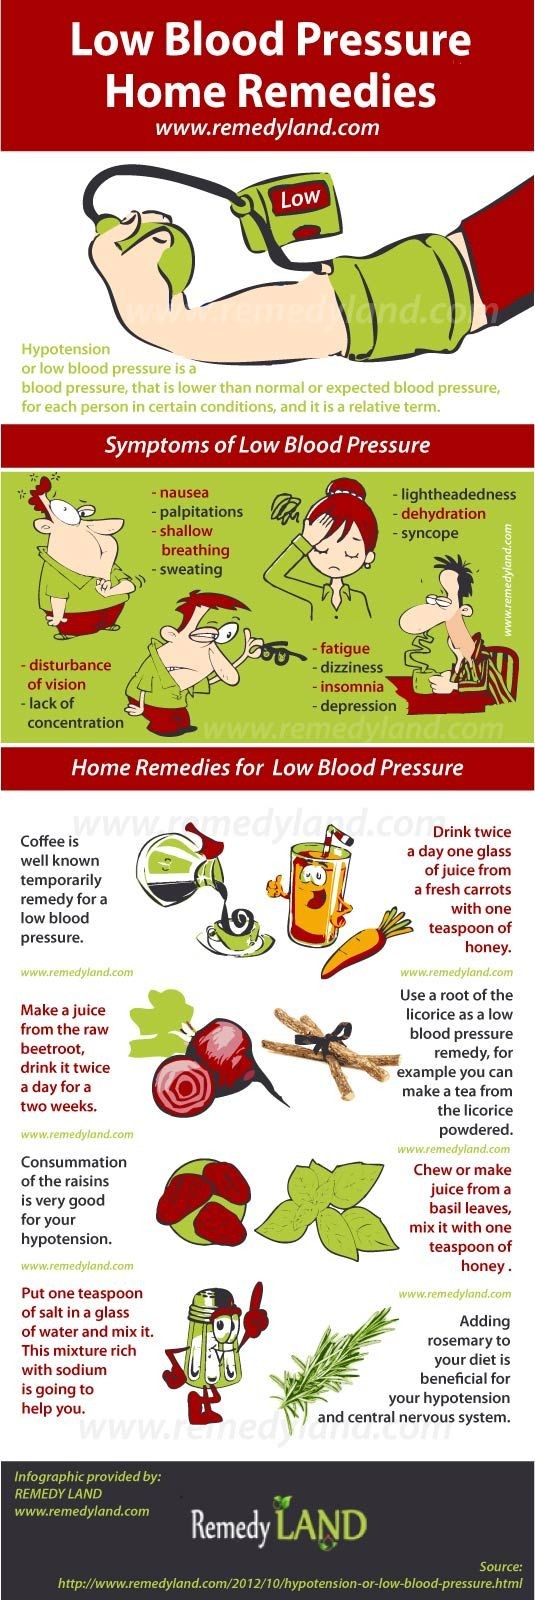 Low blood pressure home #remedies http://www.remed...